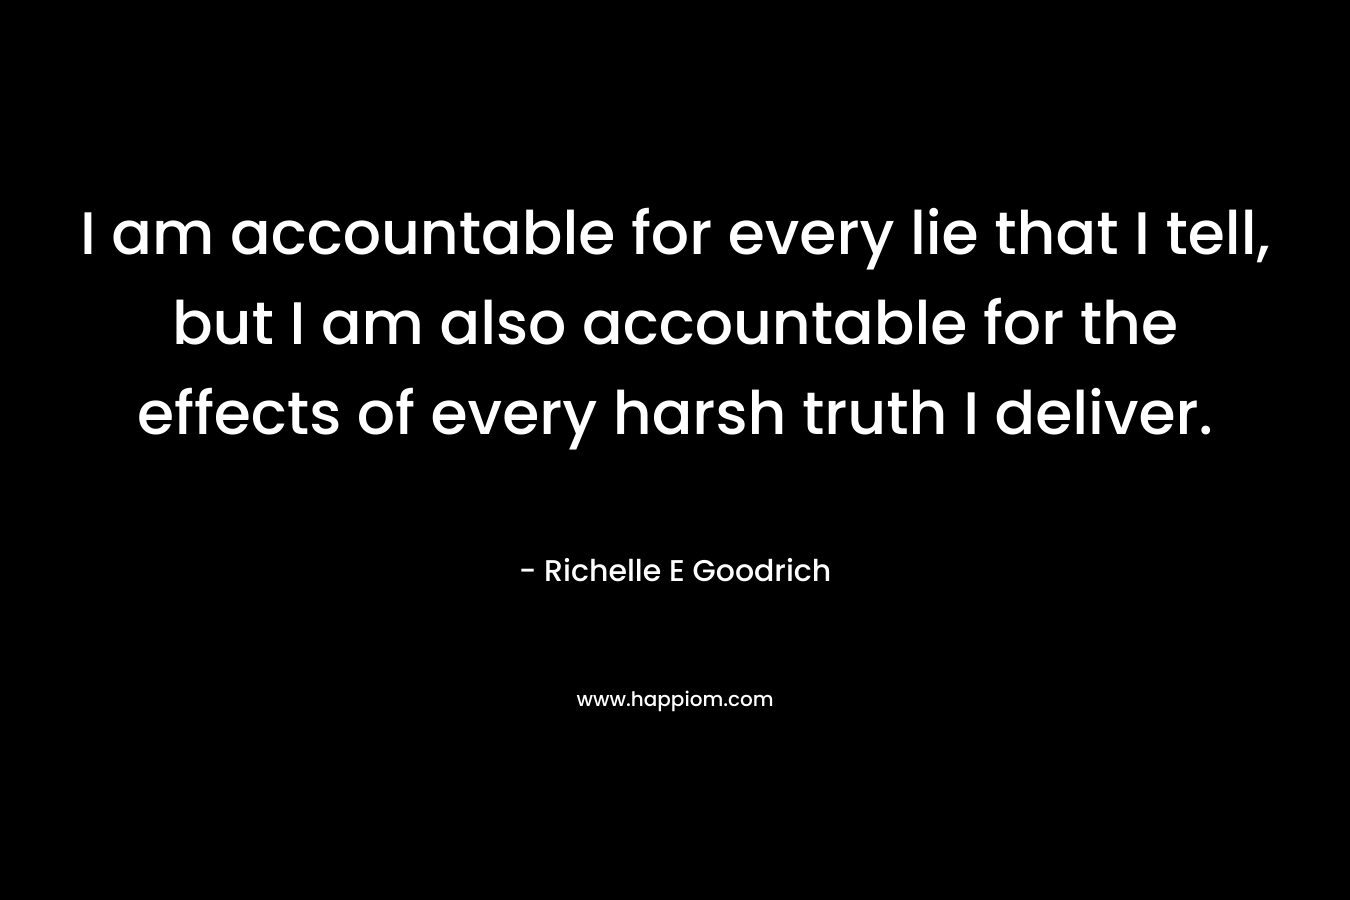 I am accountable for every lie that I tell, but I am also accountable for the effects of every harsh truth I deliver.